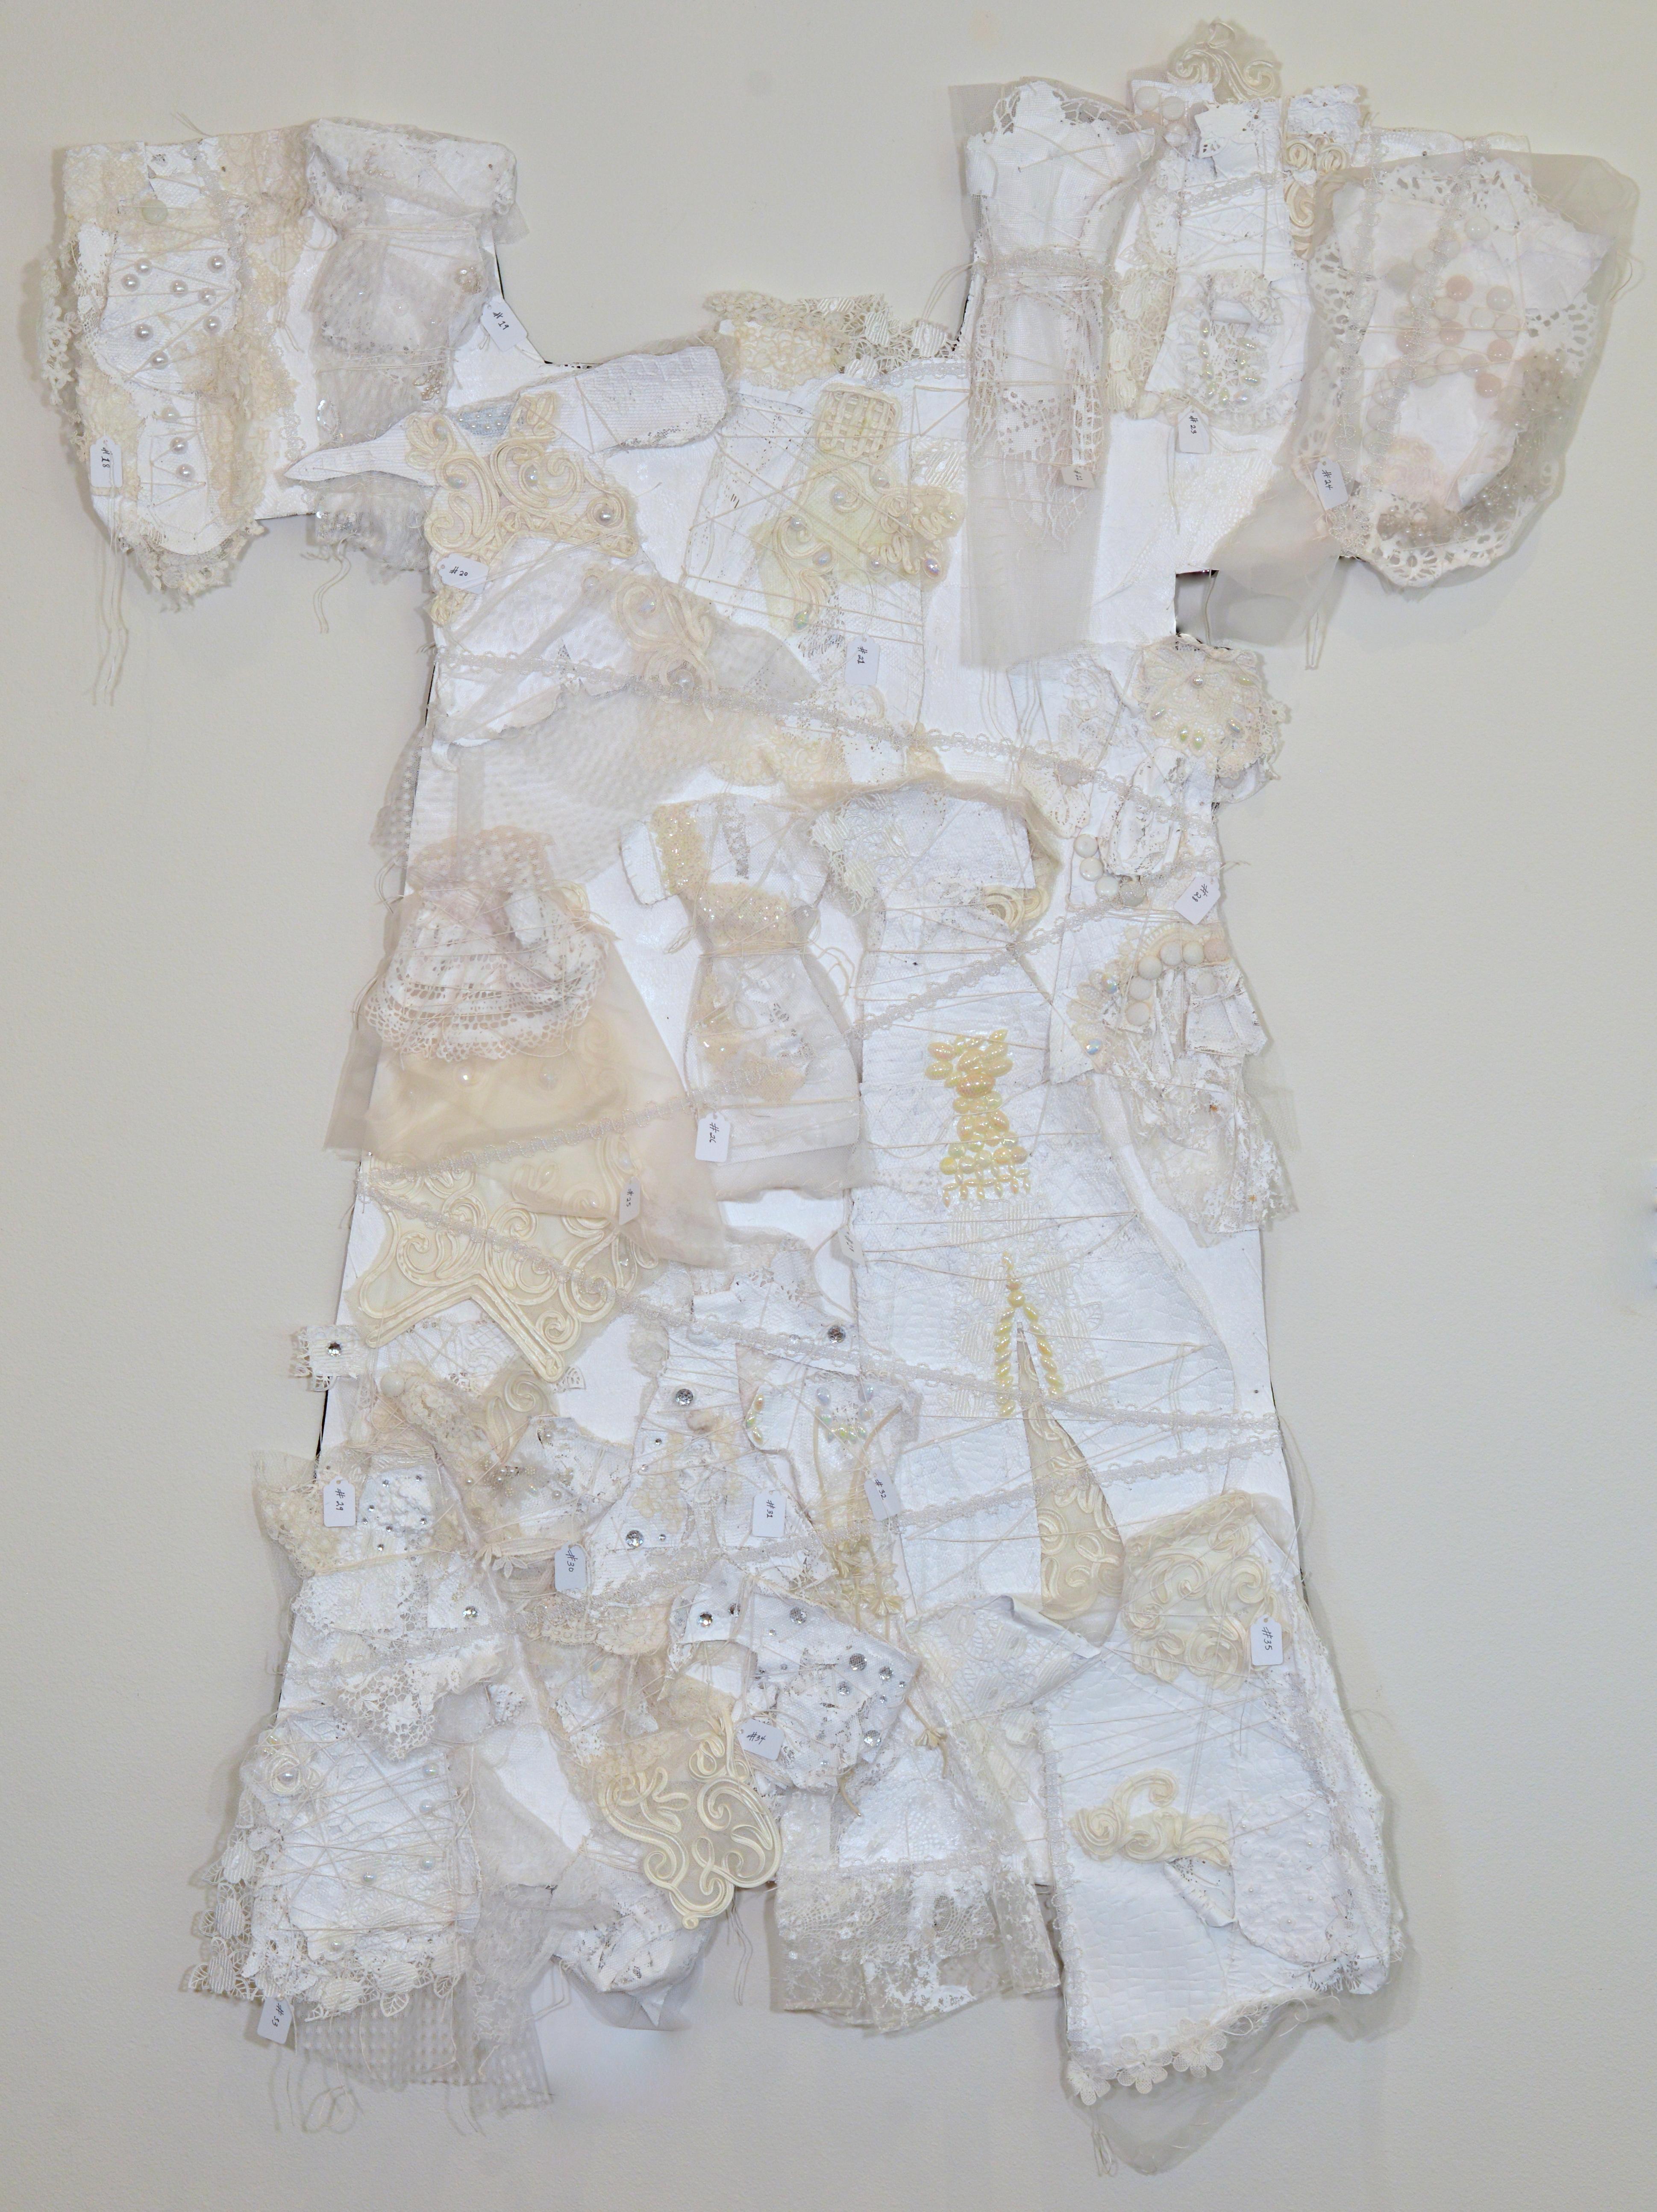 Remnants 4, Large white dress with 17 small dresses sewn on - Mixed Media Art by Andrée Carter